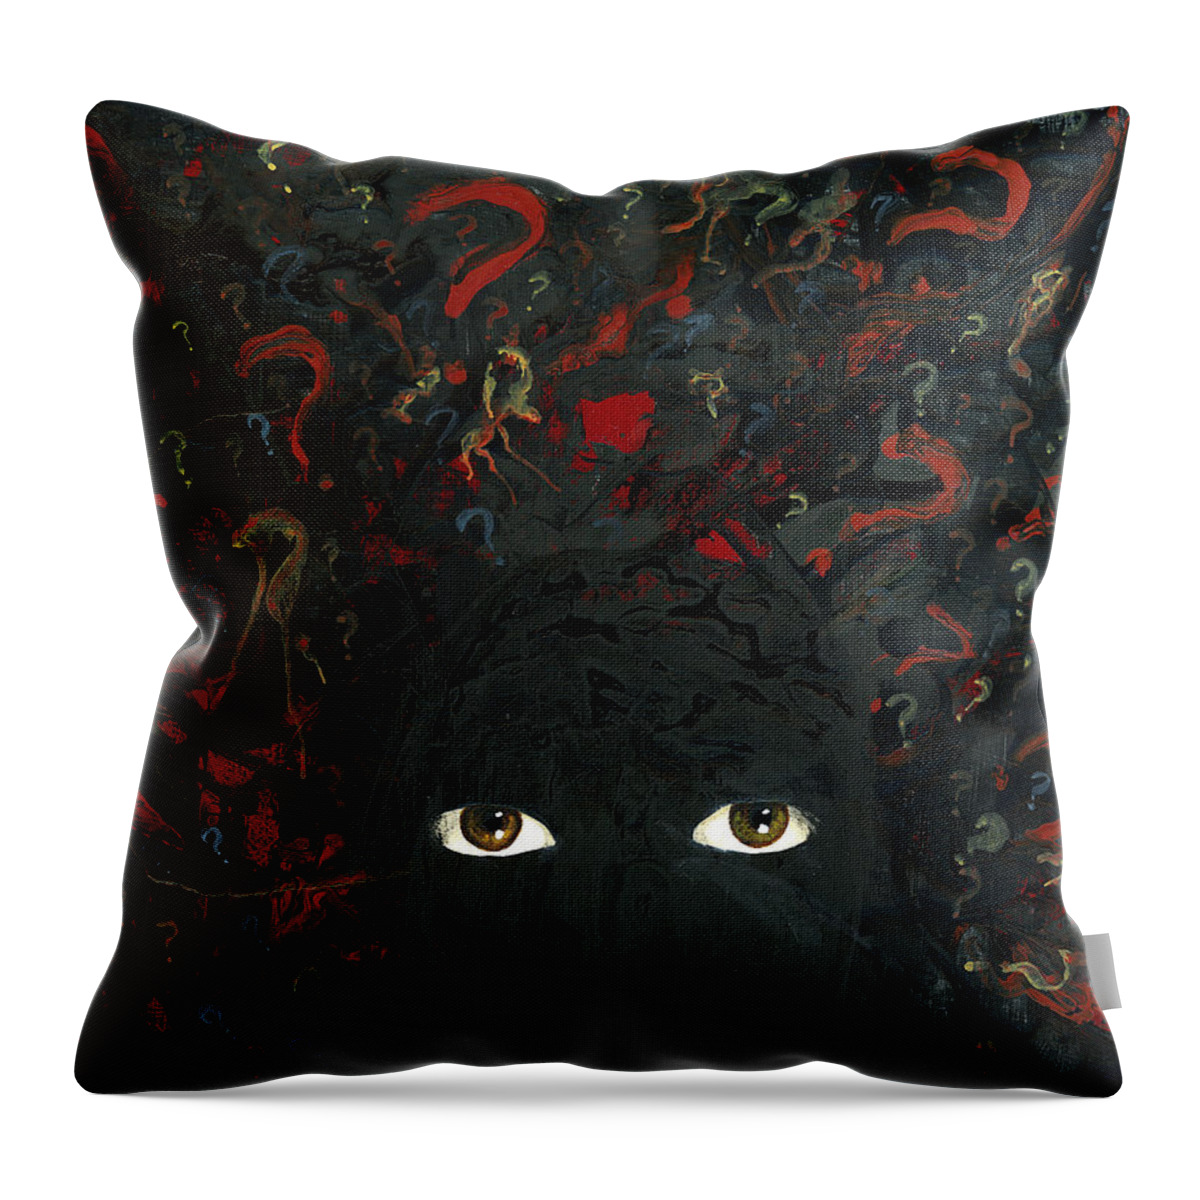 Surrounded Throw Pillow featuring the painting Surrounded By ? by Matthew Mezo